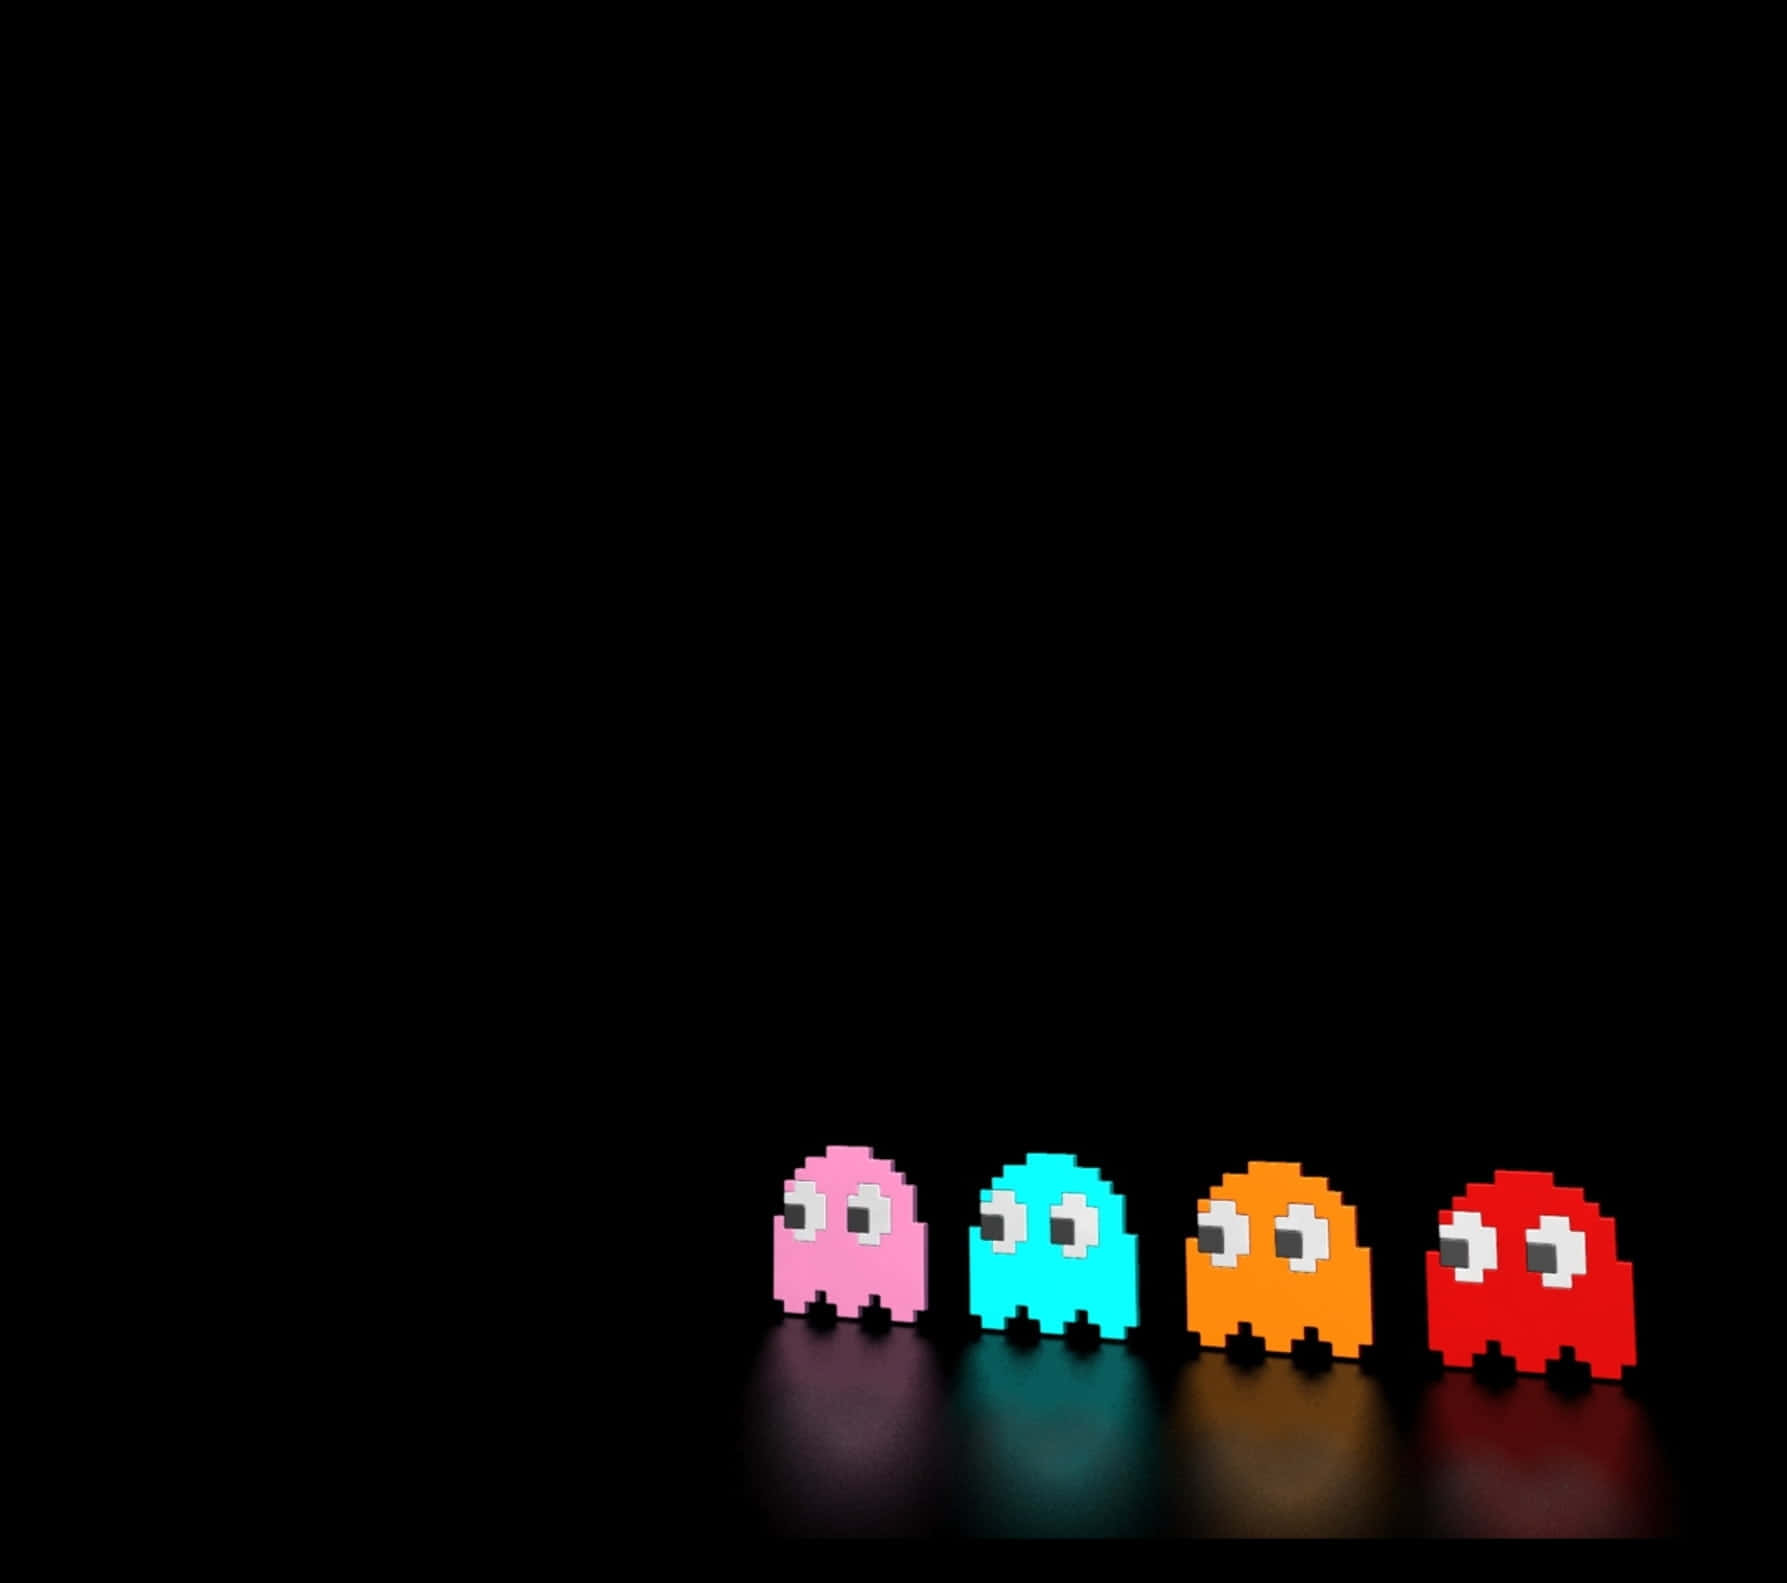 Retro Game Pac-man Ghosts Pixelated Background